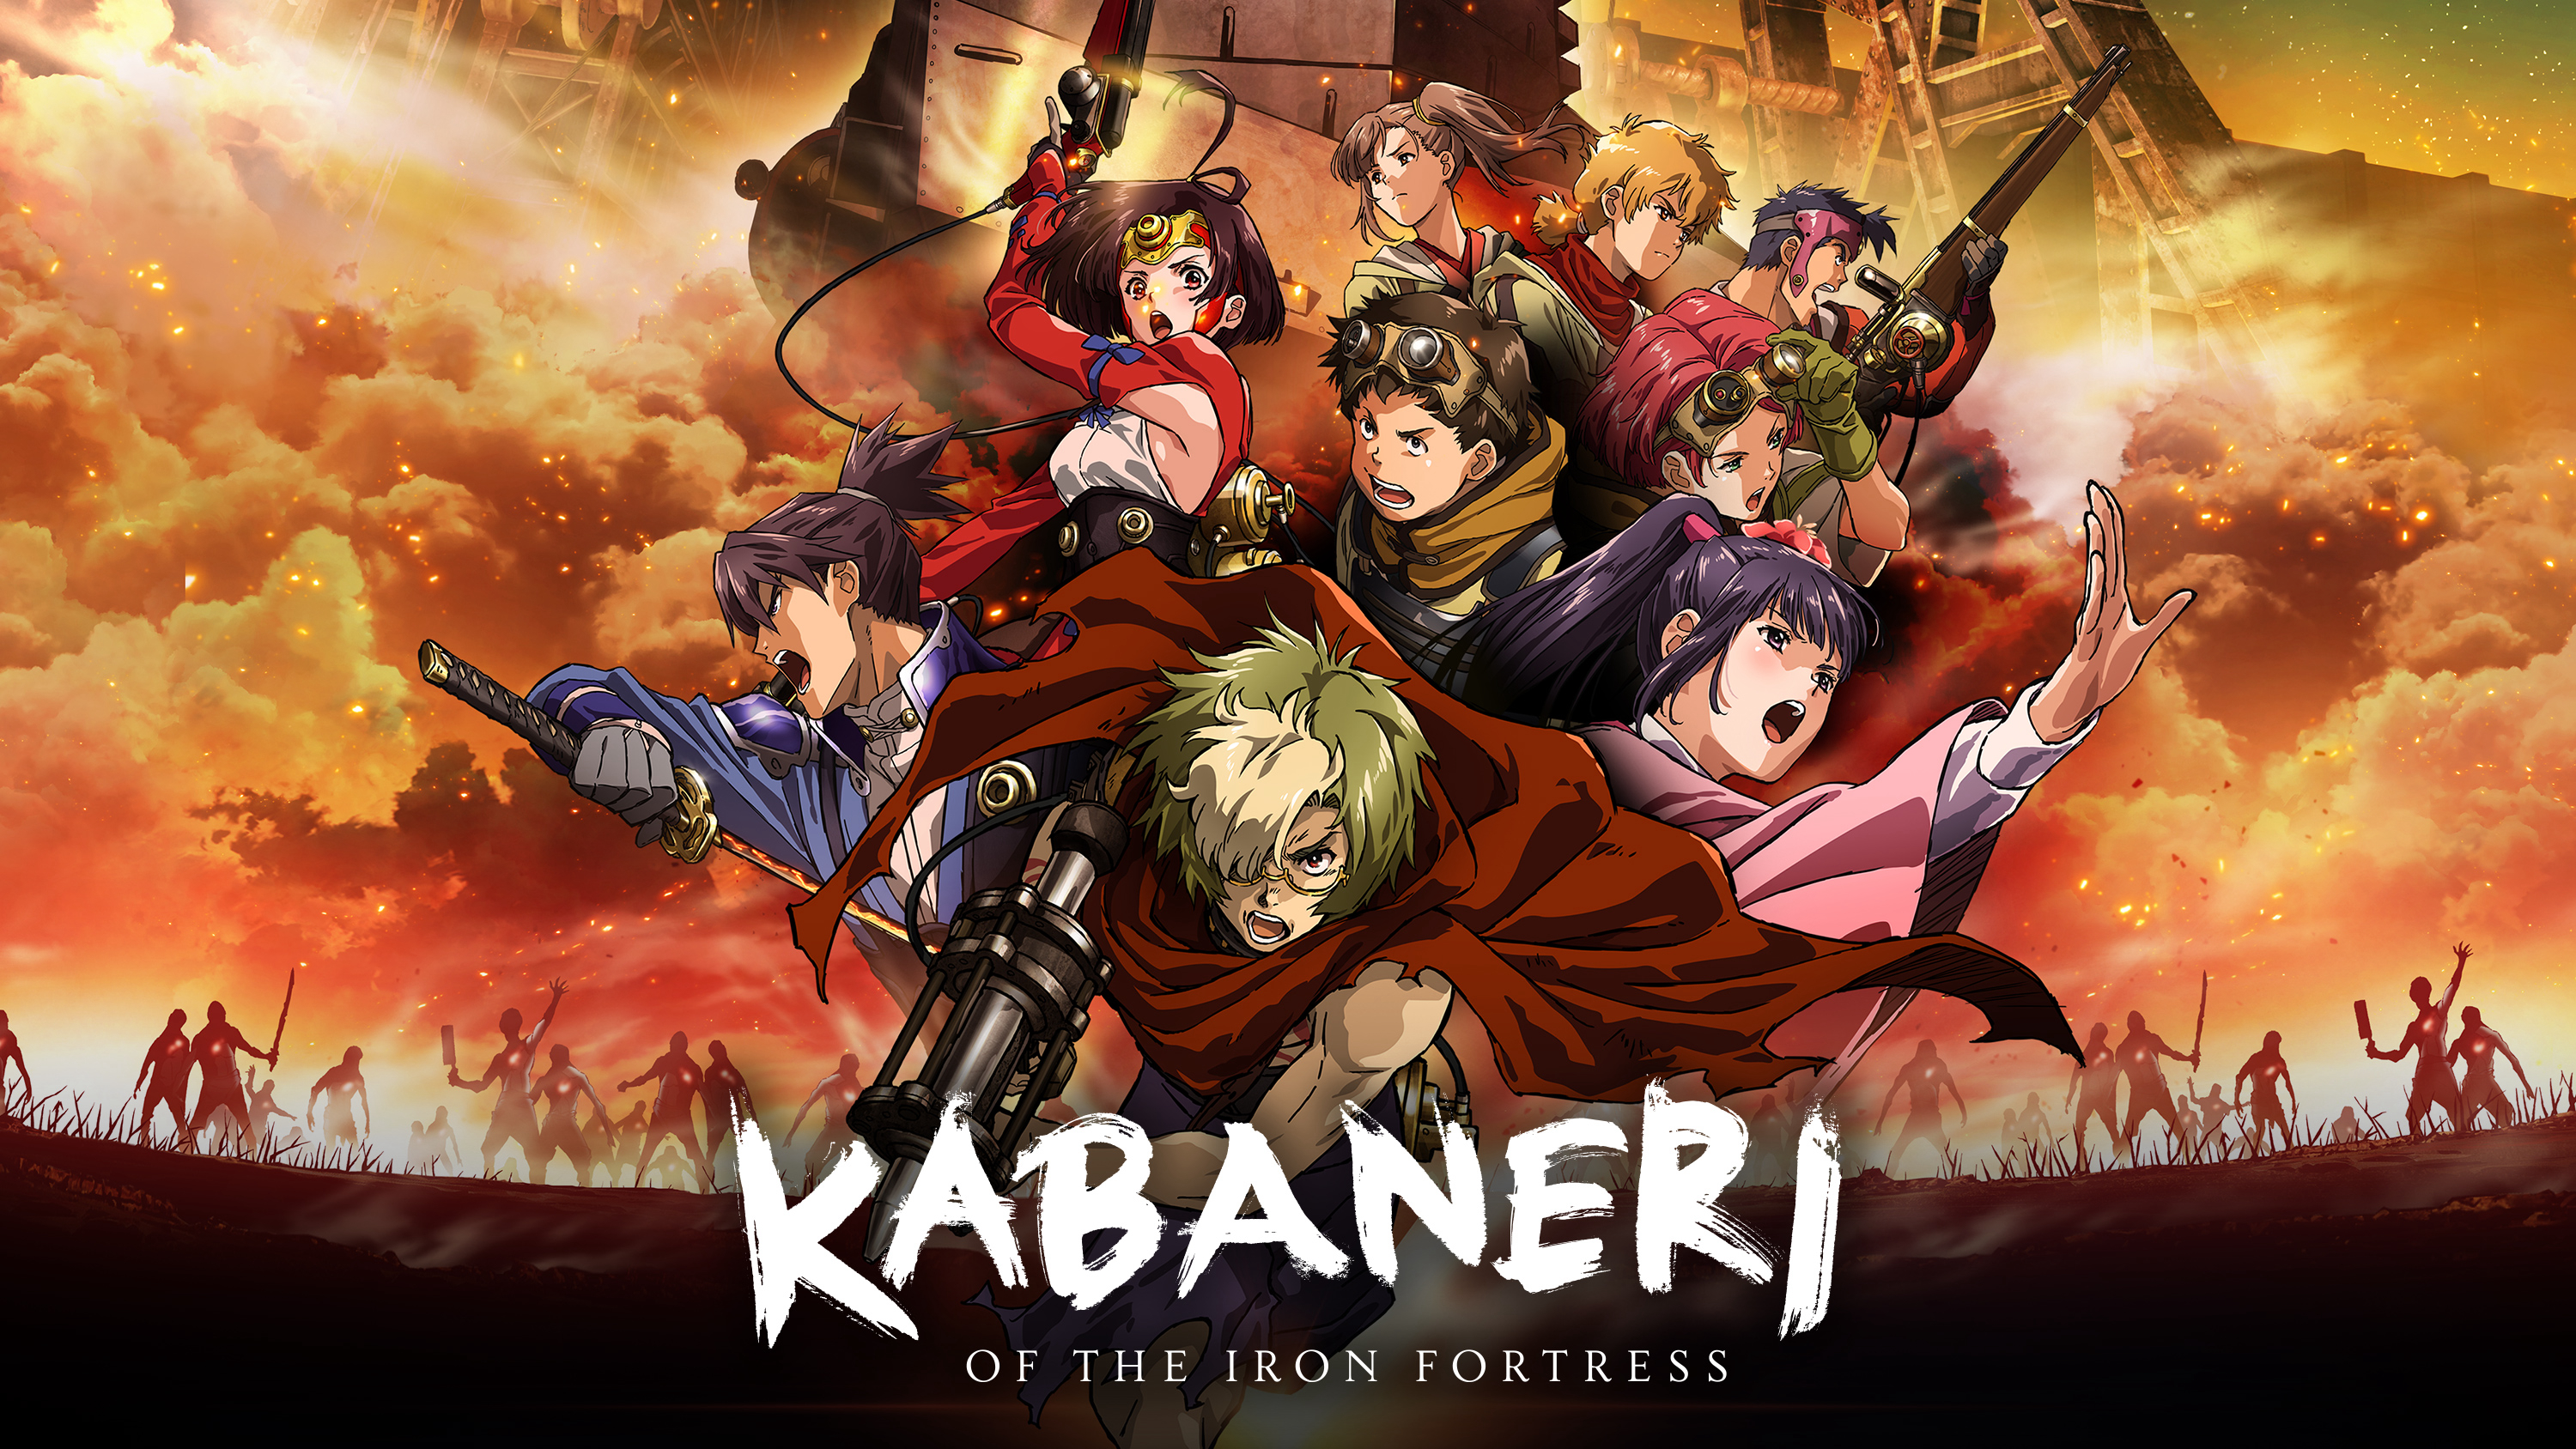 Thiết giáp chi thành - Kabaneri of the Iron Fortress (2016)